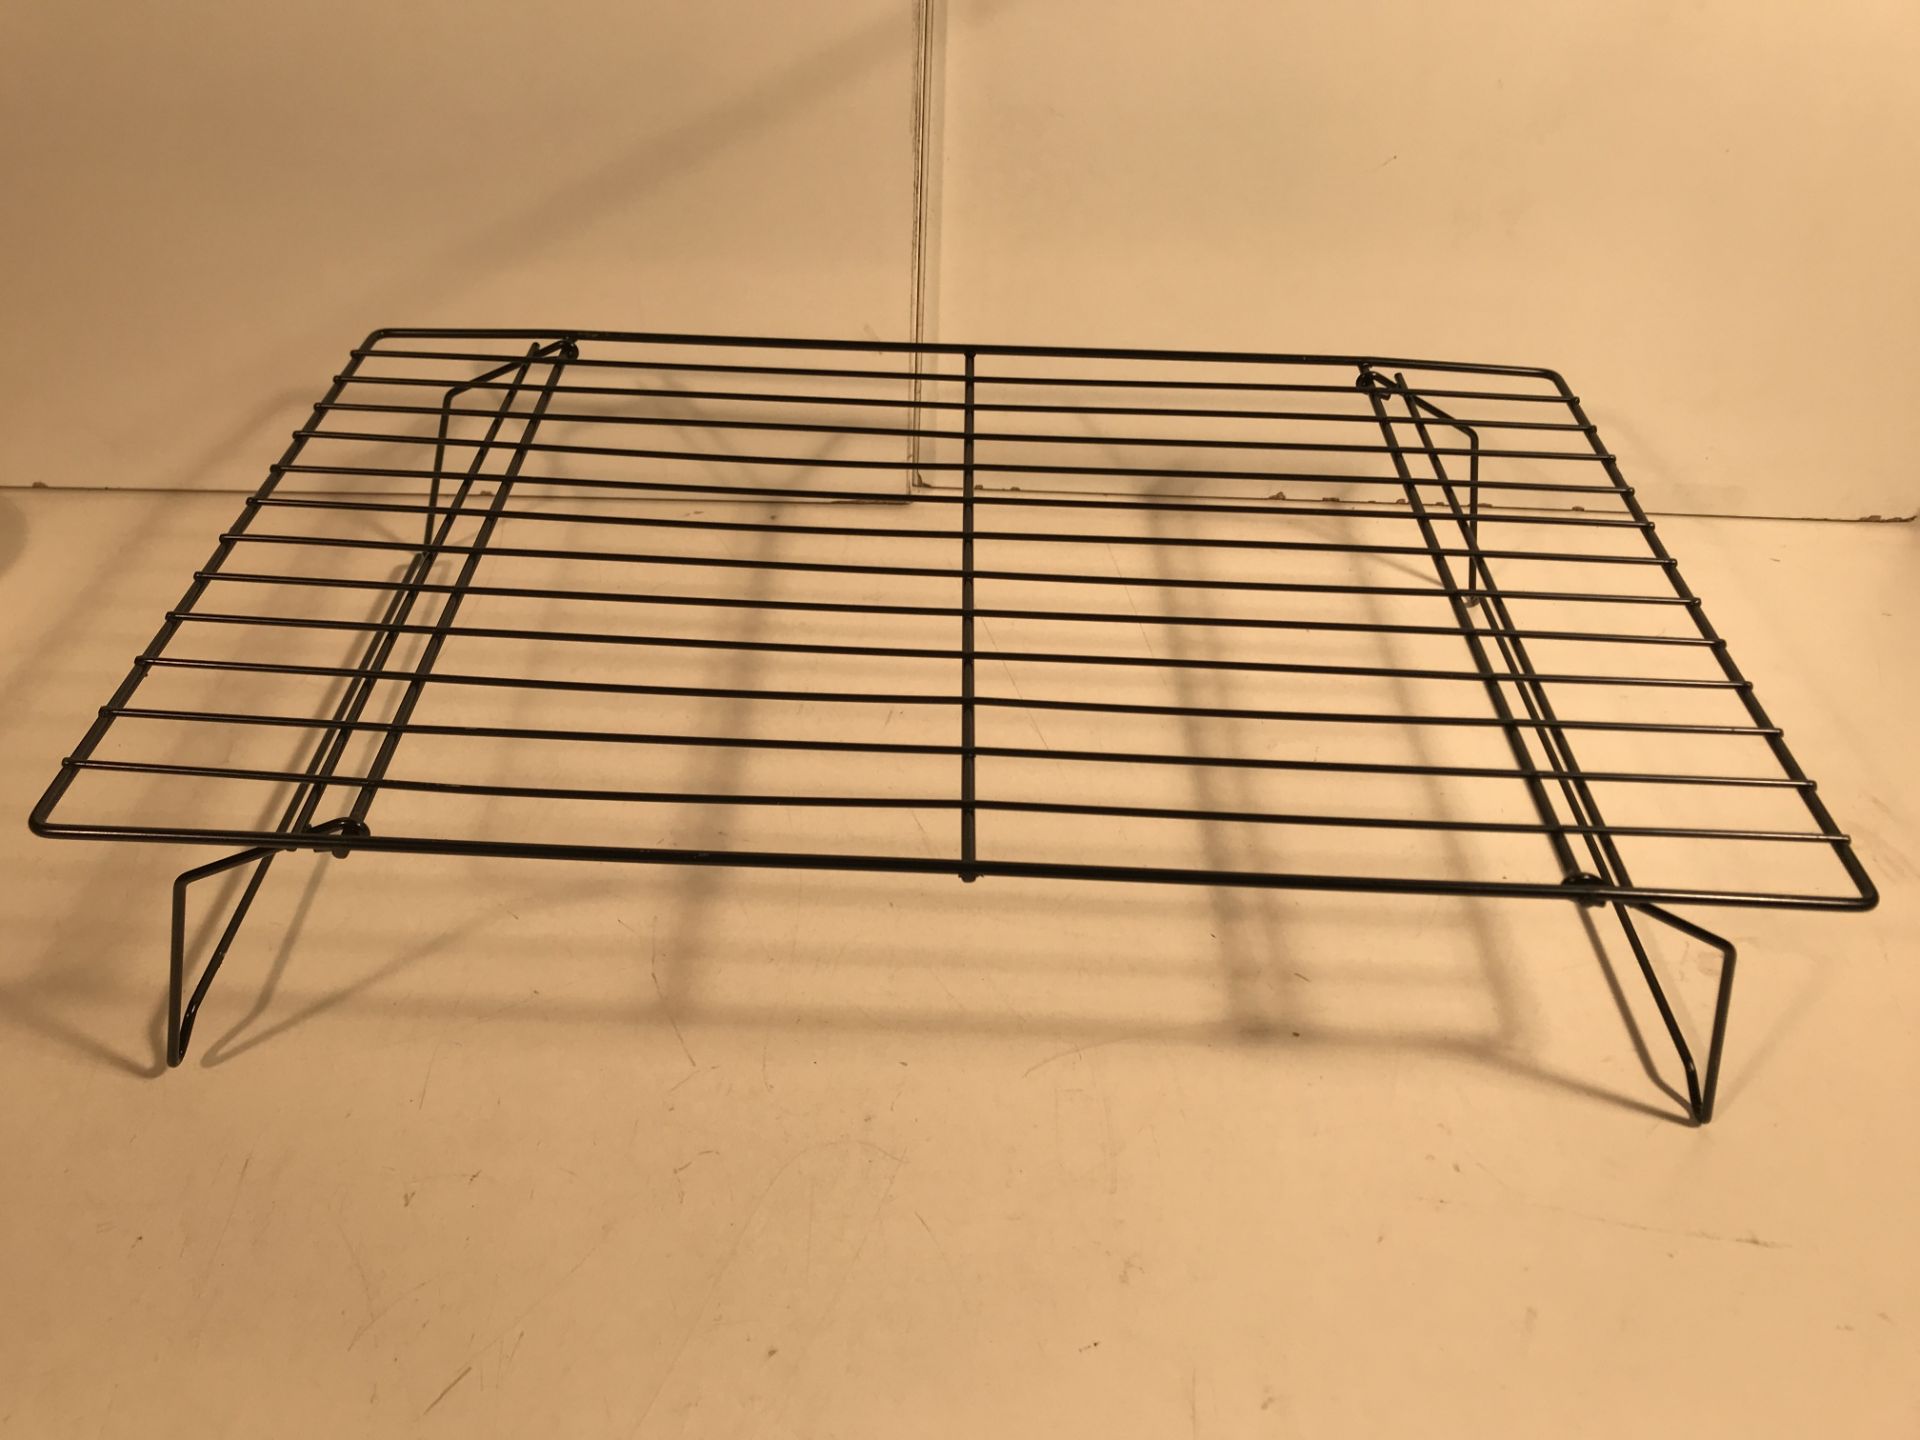 14 x Stackable Cooling Racks - Image 3 of 4